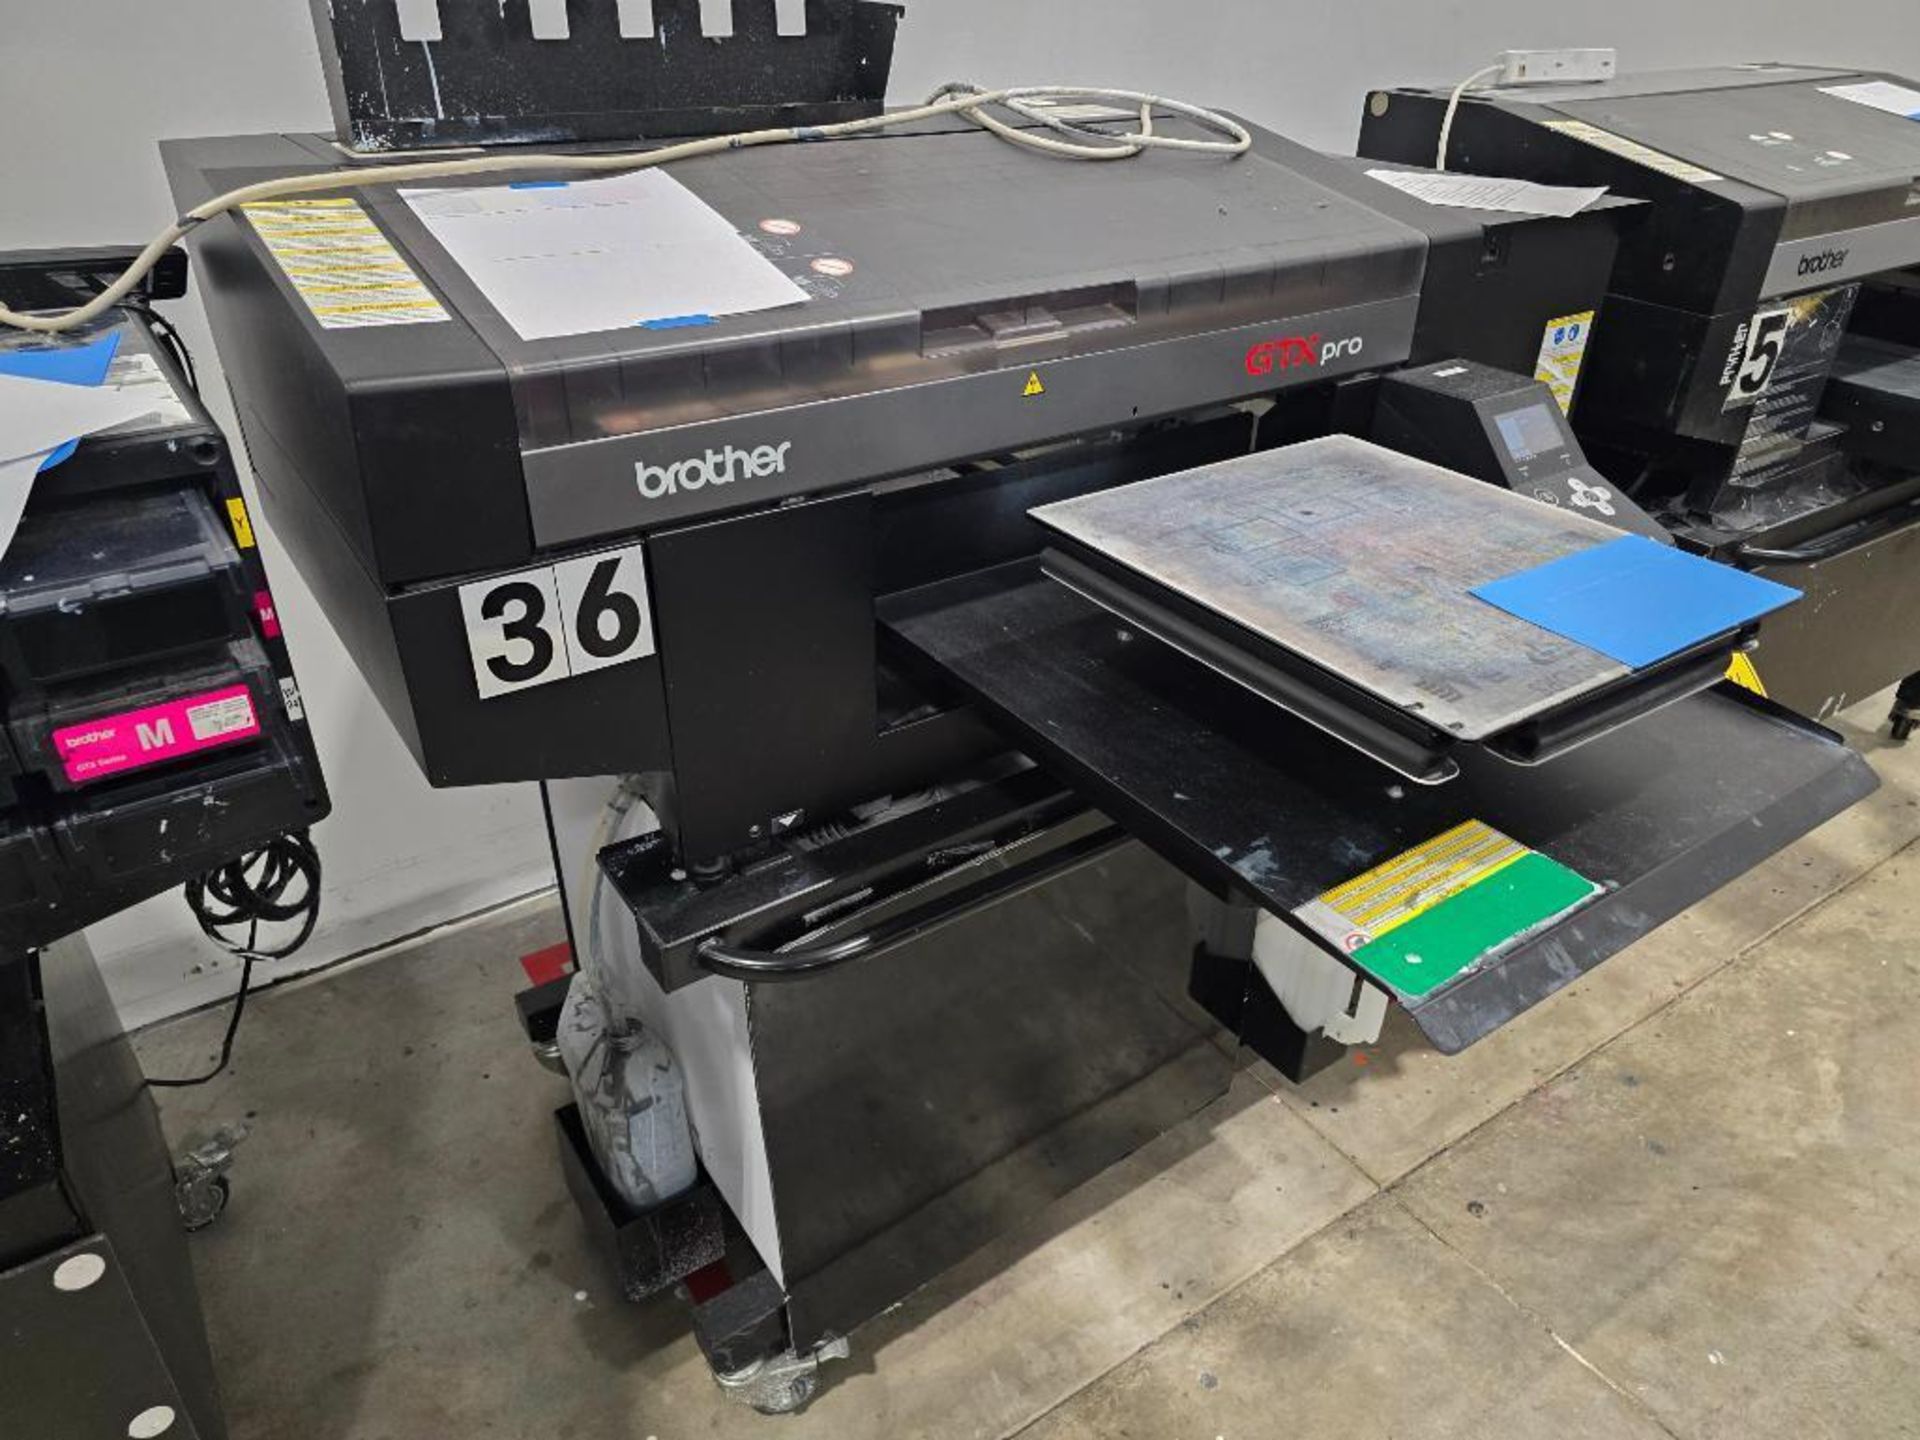 2022 Brother GTX-424 Pro-B DTG (Direct to Garment) Printer, Twin Head, 5-Color, Water Based Pigmente - Image 3 of 9